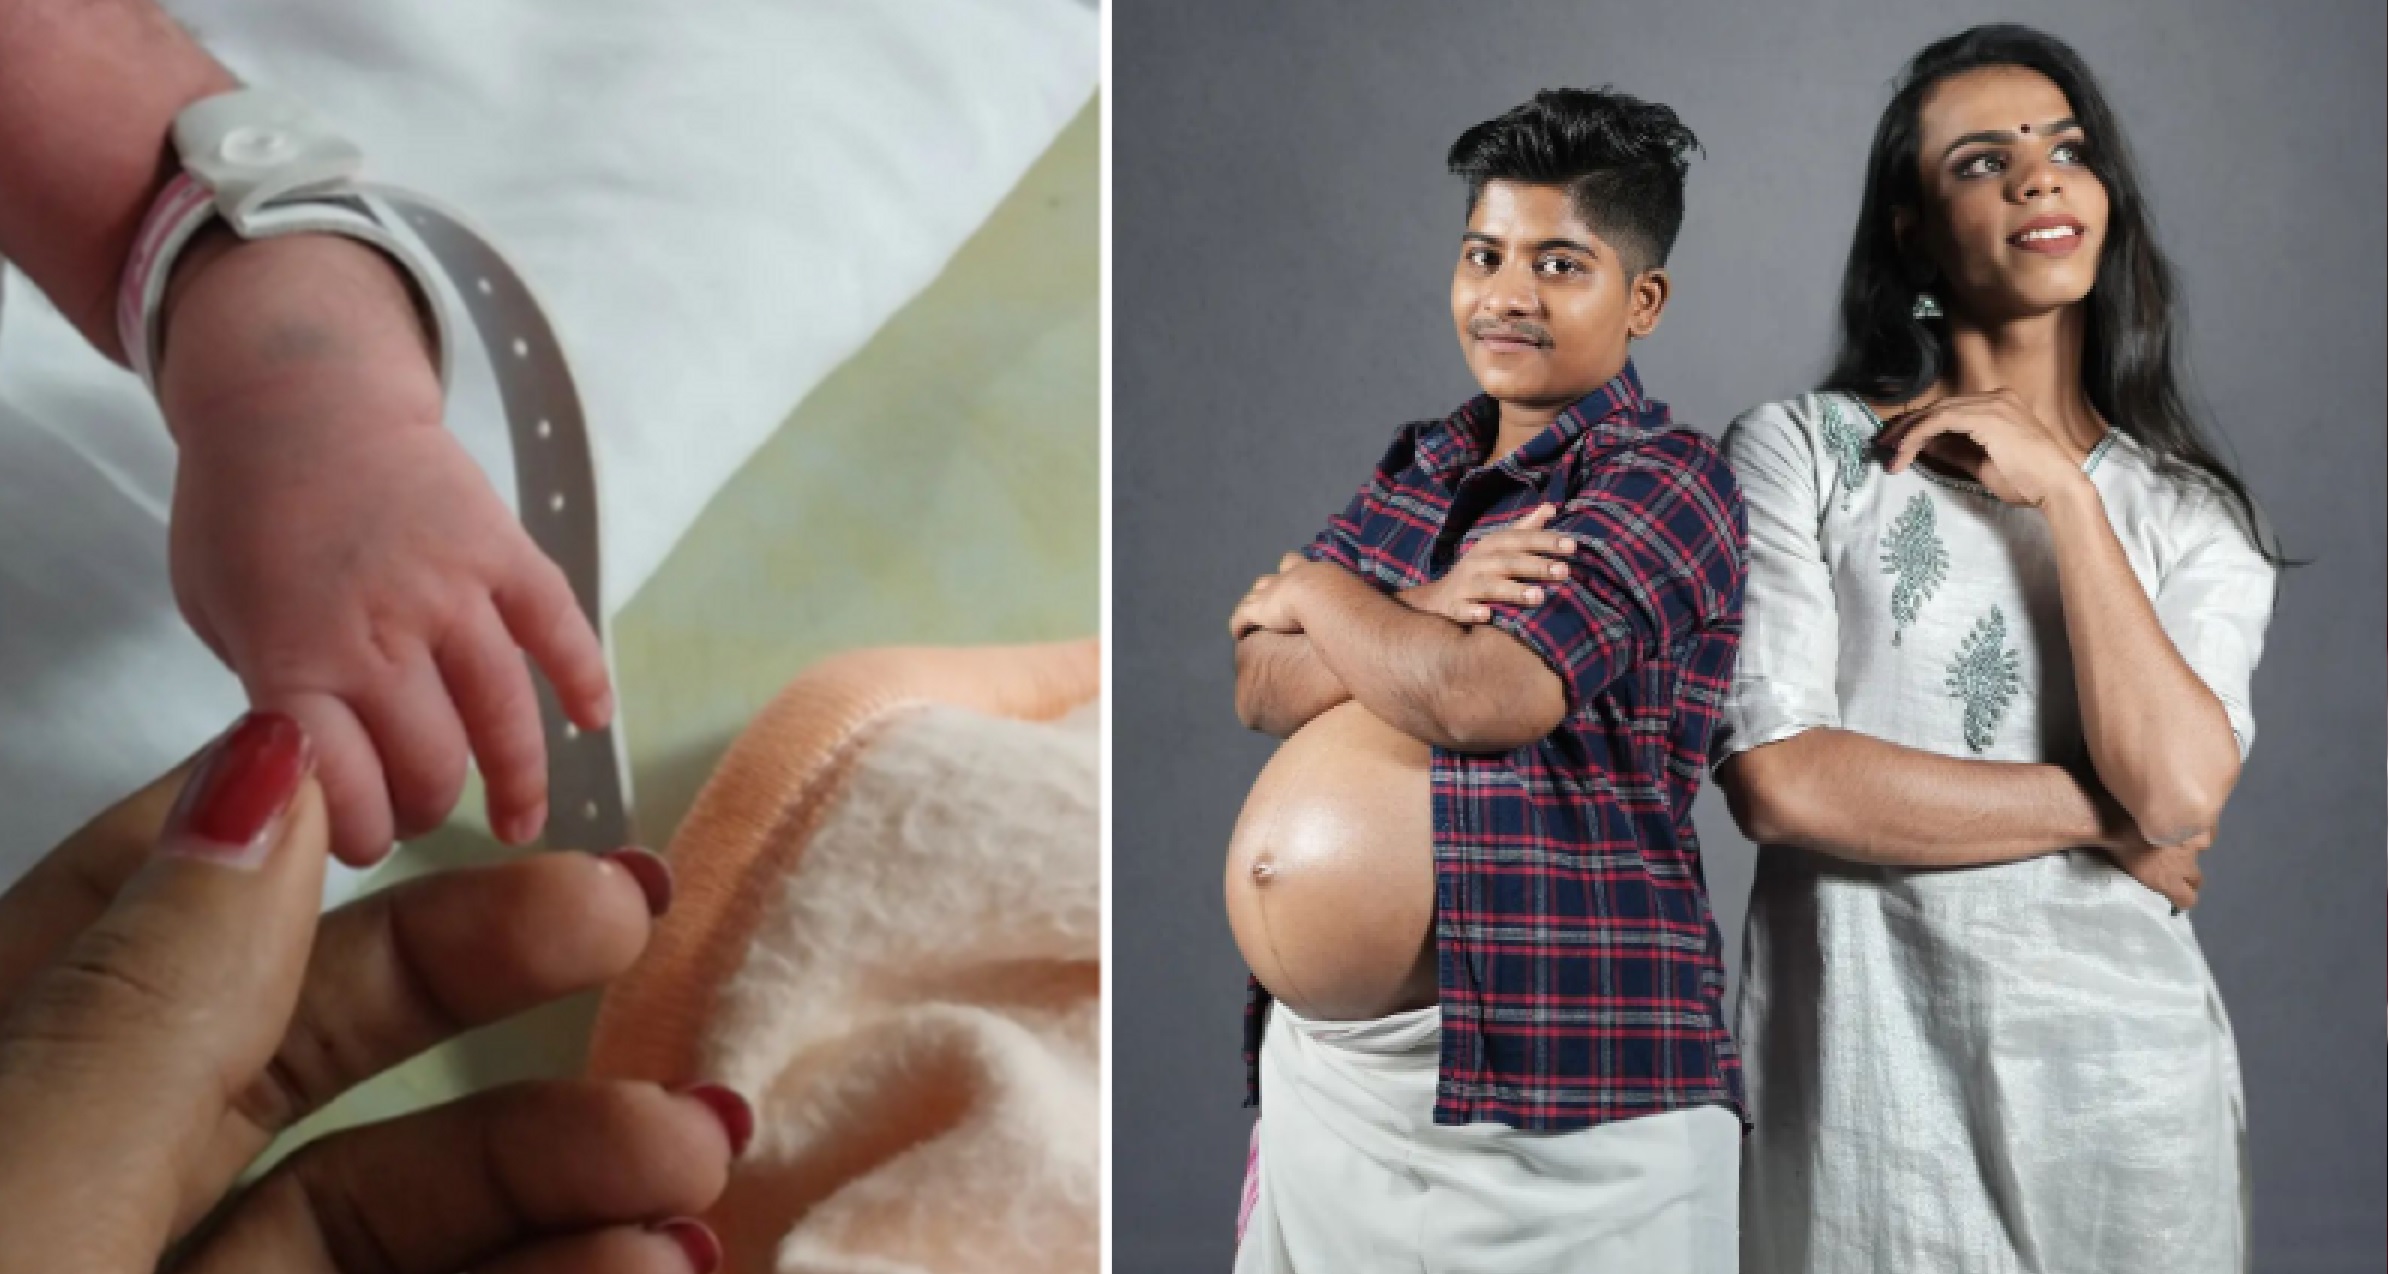 Kerala Transgender Couple Blessed With A Baby Days After Their Maternity Photoshoot Went Viral